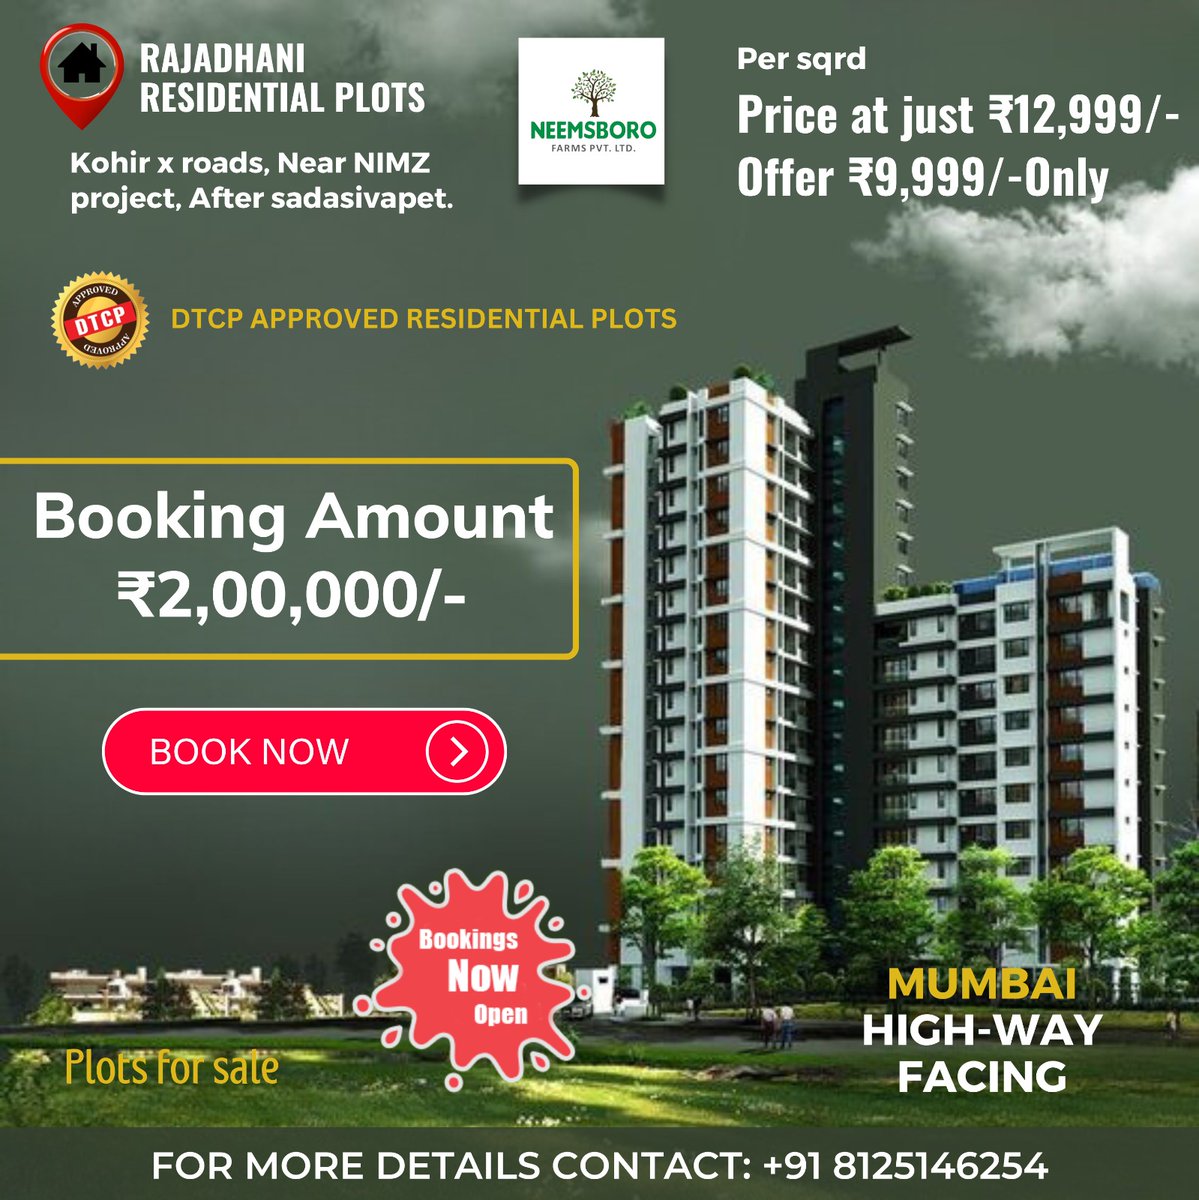 Rajadhani Residential Plots by Neemsboro Farms Pvt. Ltd.! Secure your plot with DTCP approval at ₹9,999/sqyd. Limited offer! Booking: ₹2,00,000. Prime location facing Mumbai Highway. Build your future home now.
#MegaProperties #DreamHomes #LuxuryLiving #RealEstateDeals